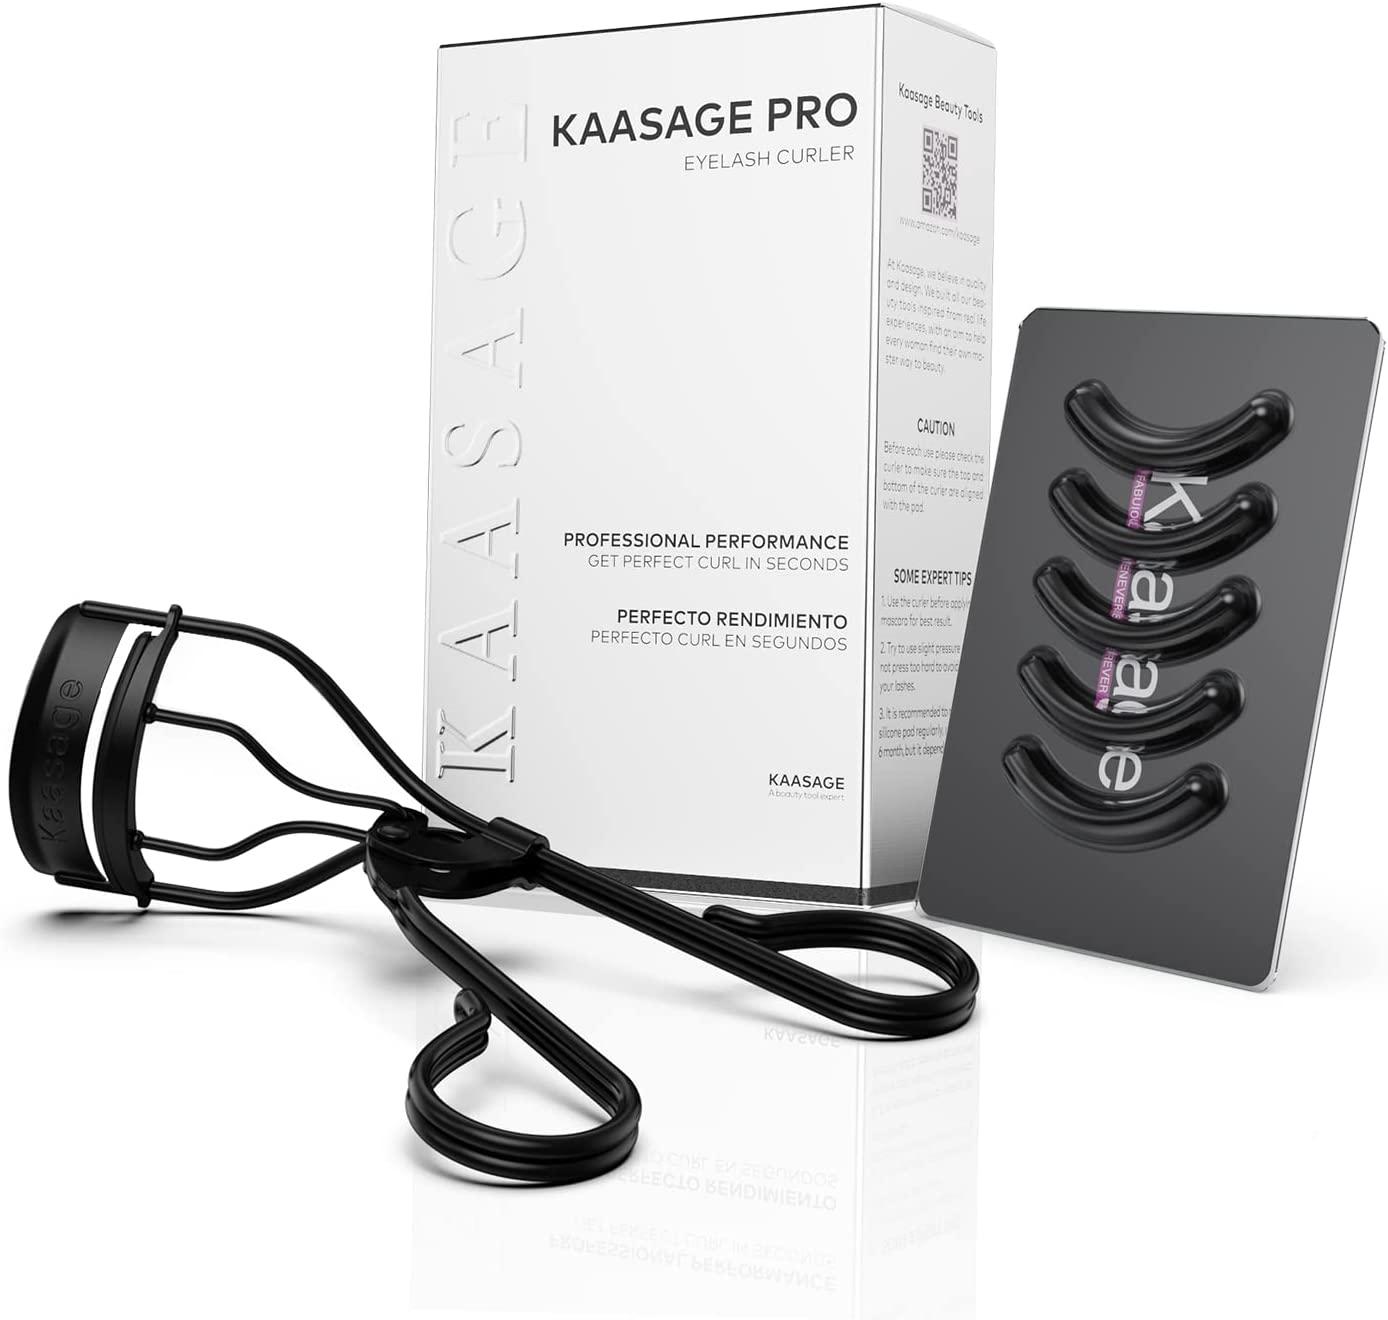 Kaasage Eyelash Curler for Women - Black Professional Lash Curler with  Refill Silicone Pads. Easy to Curl Open-Eye Eyelashes Naturally in Seconds  with No Pinching, No Pulling and Last Long